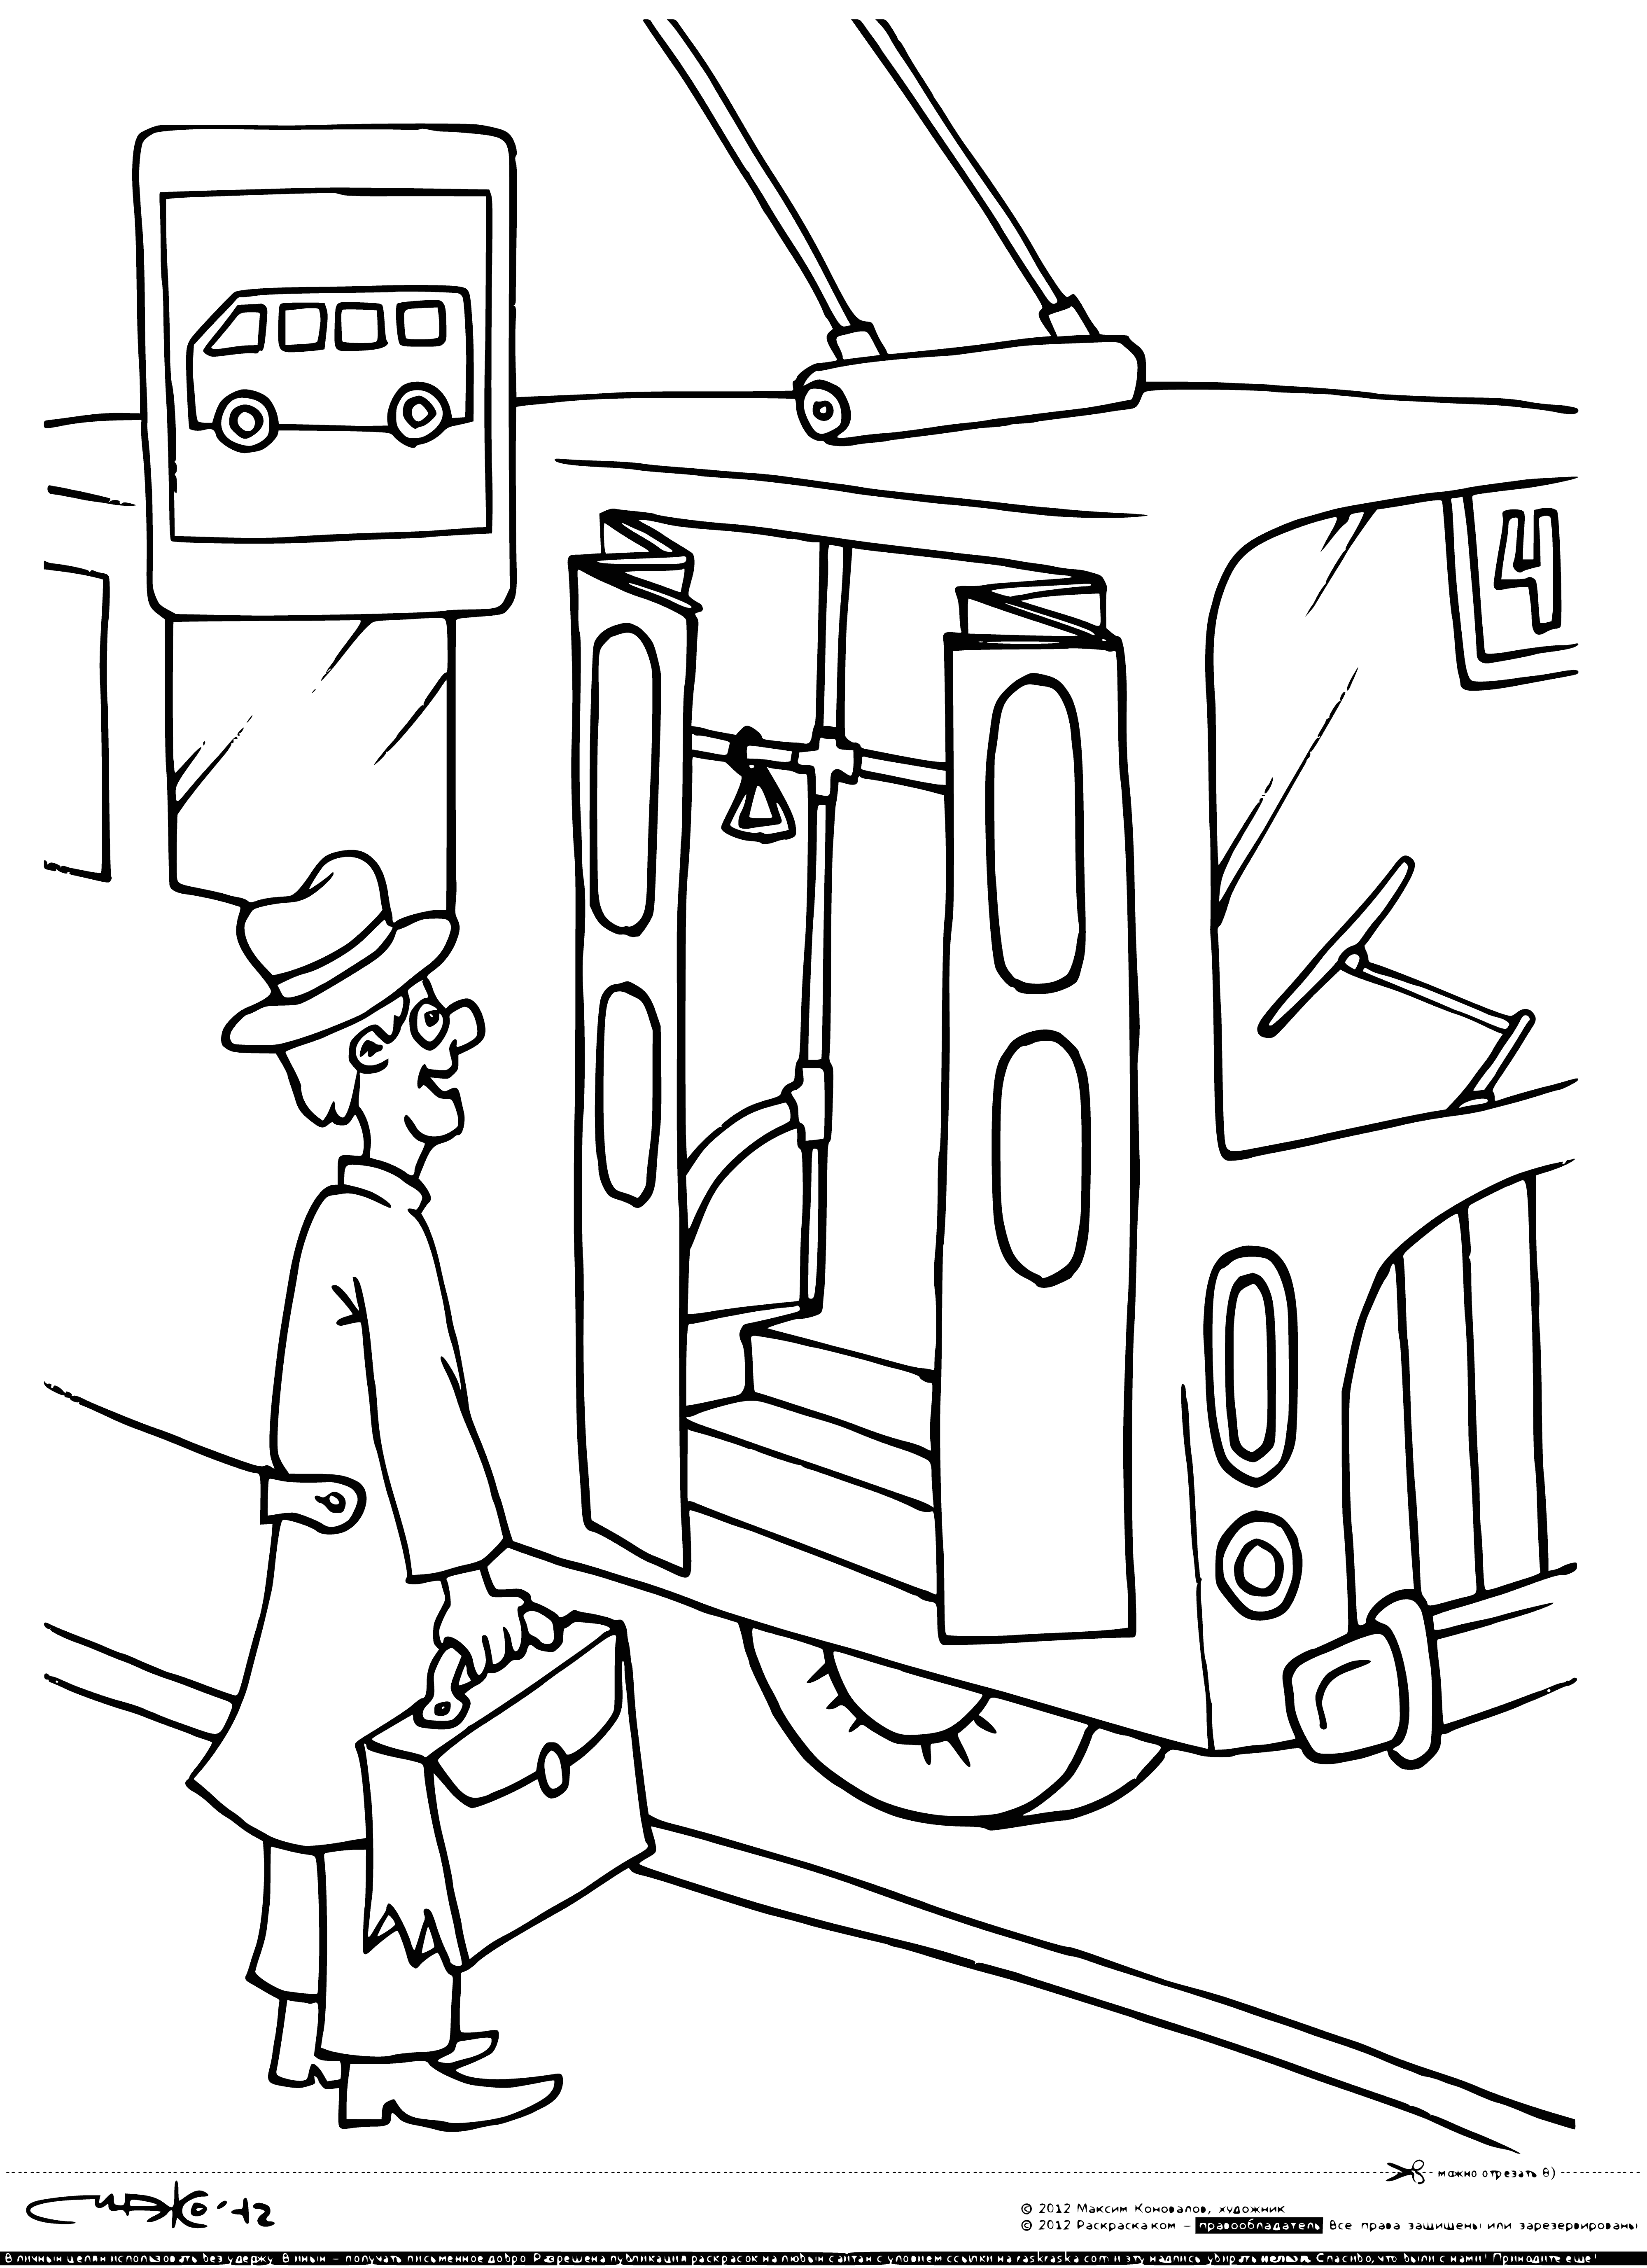 Bus (trolleybus) stop coloring page